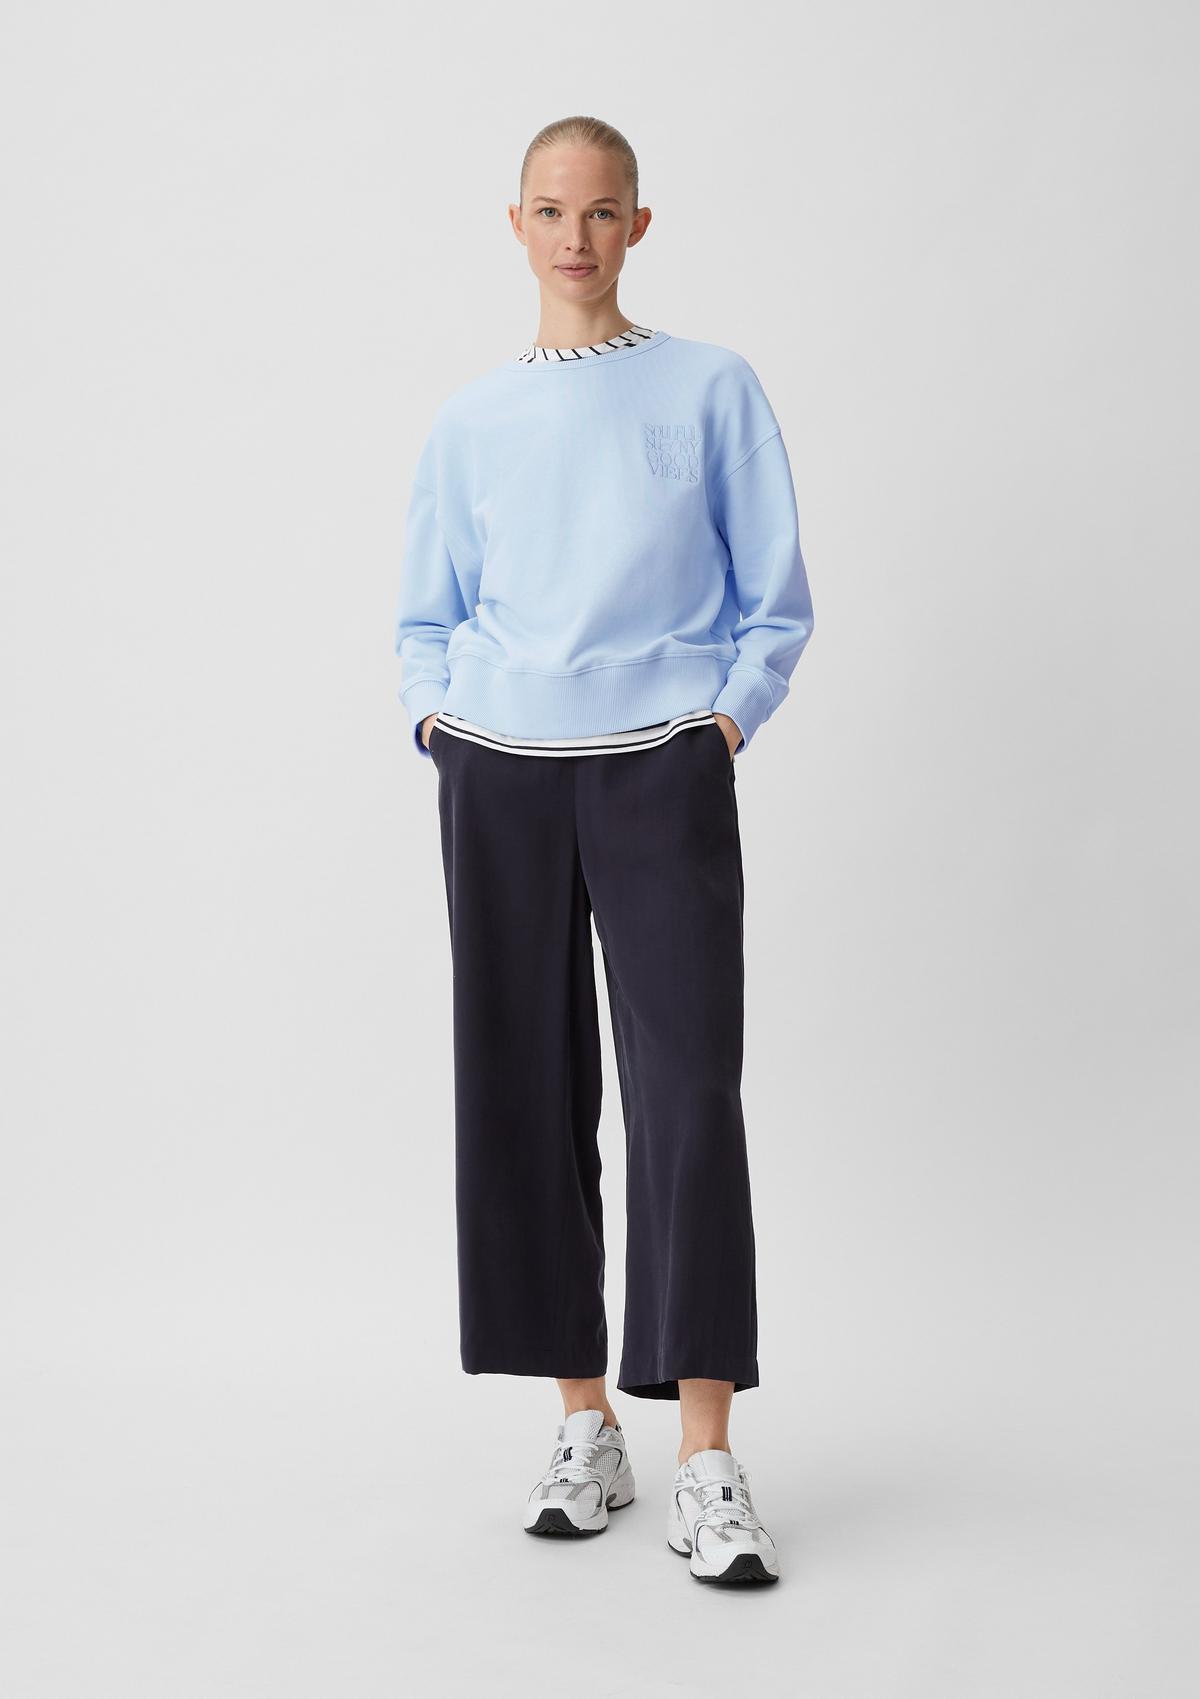 comma Sweatshirt in a relaxed fit